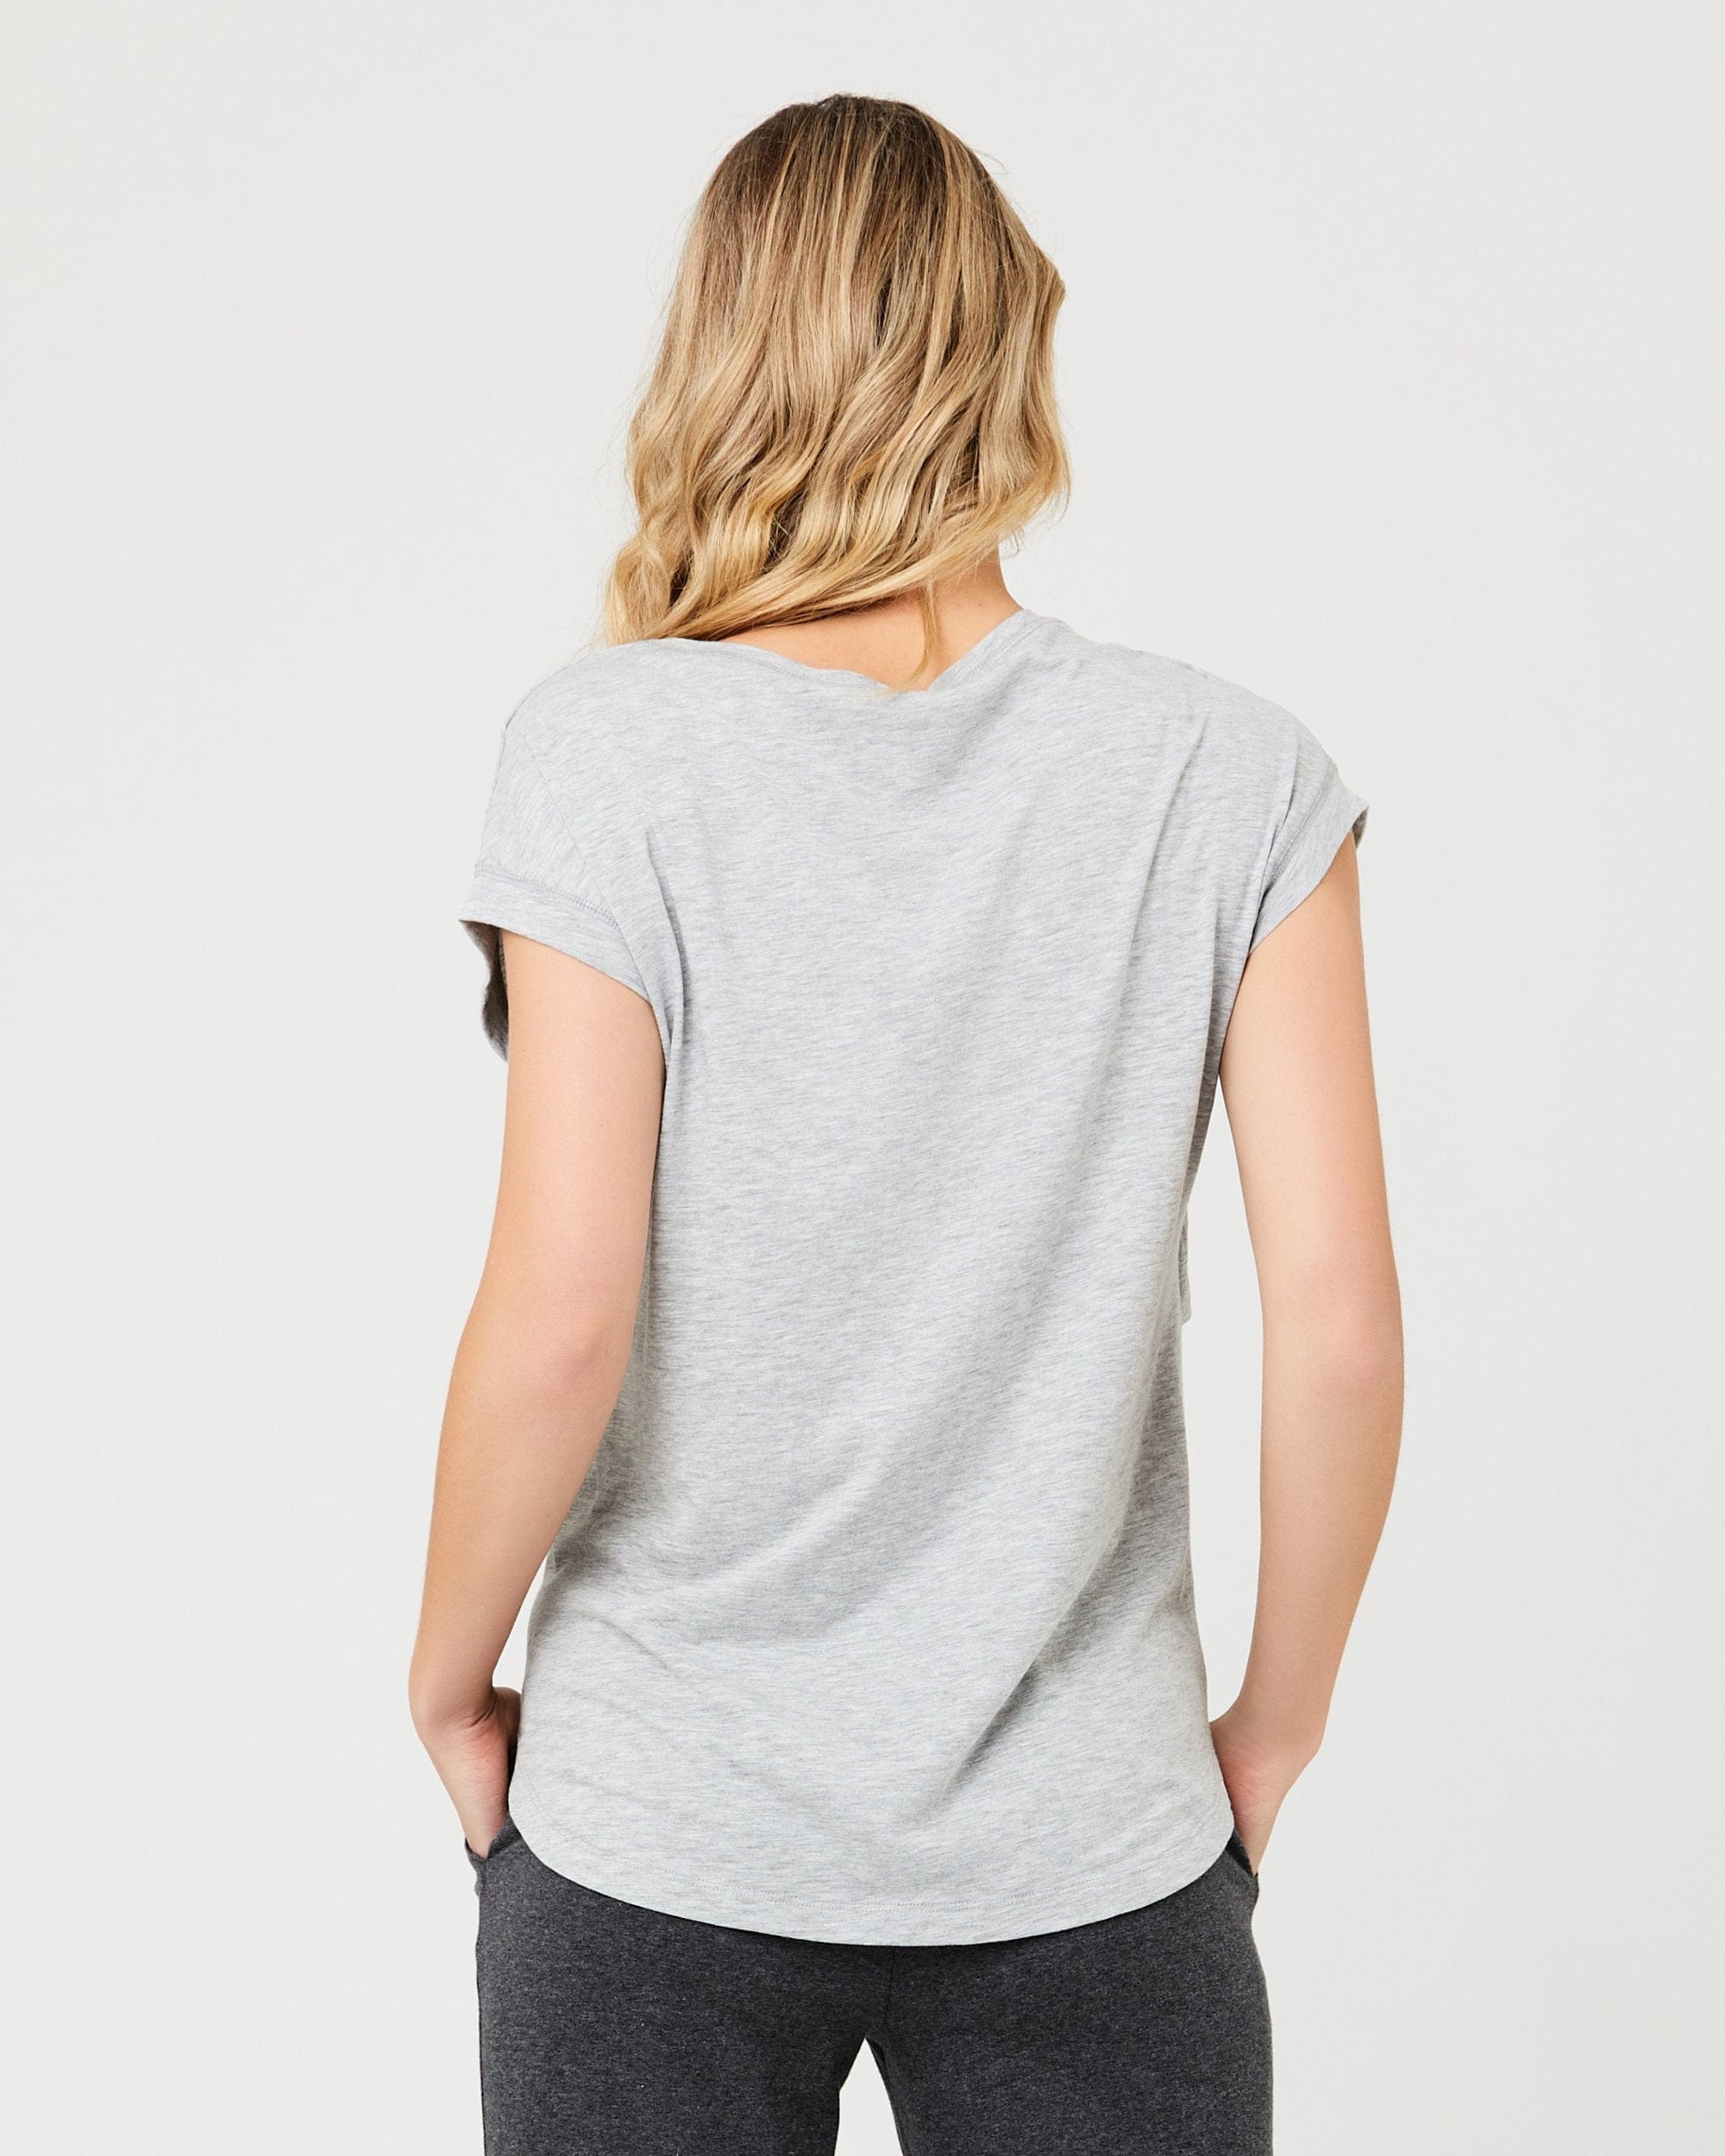 Ripe Maternity Richie Nursing Tee - Grey Marle - Momease Baby Boutique